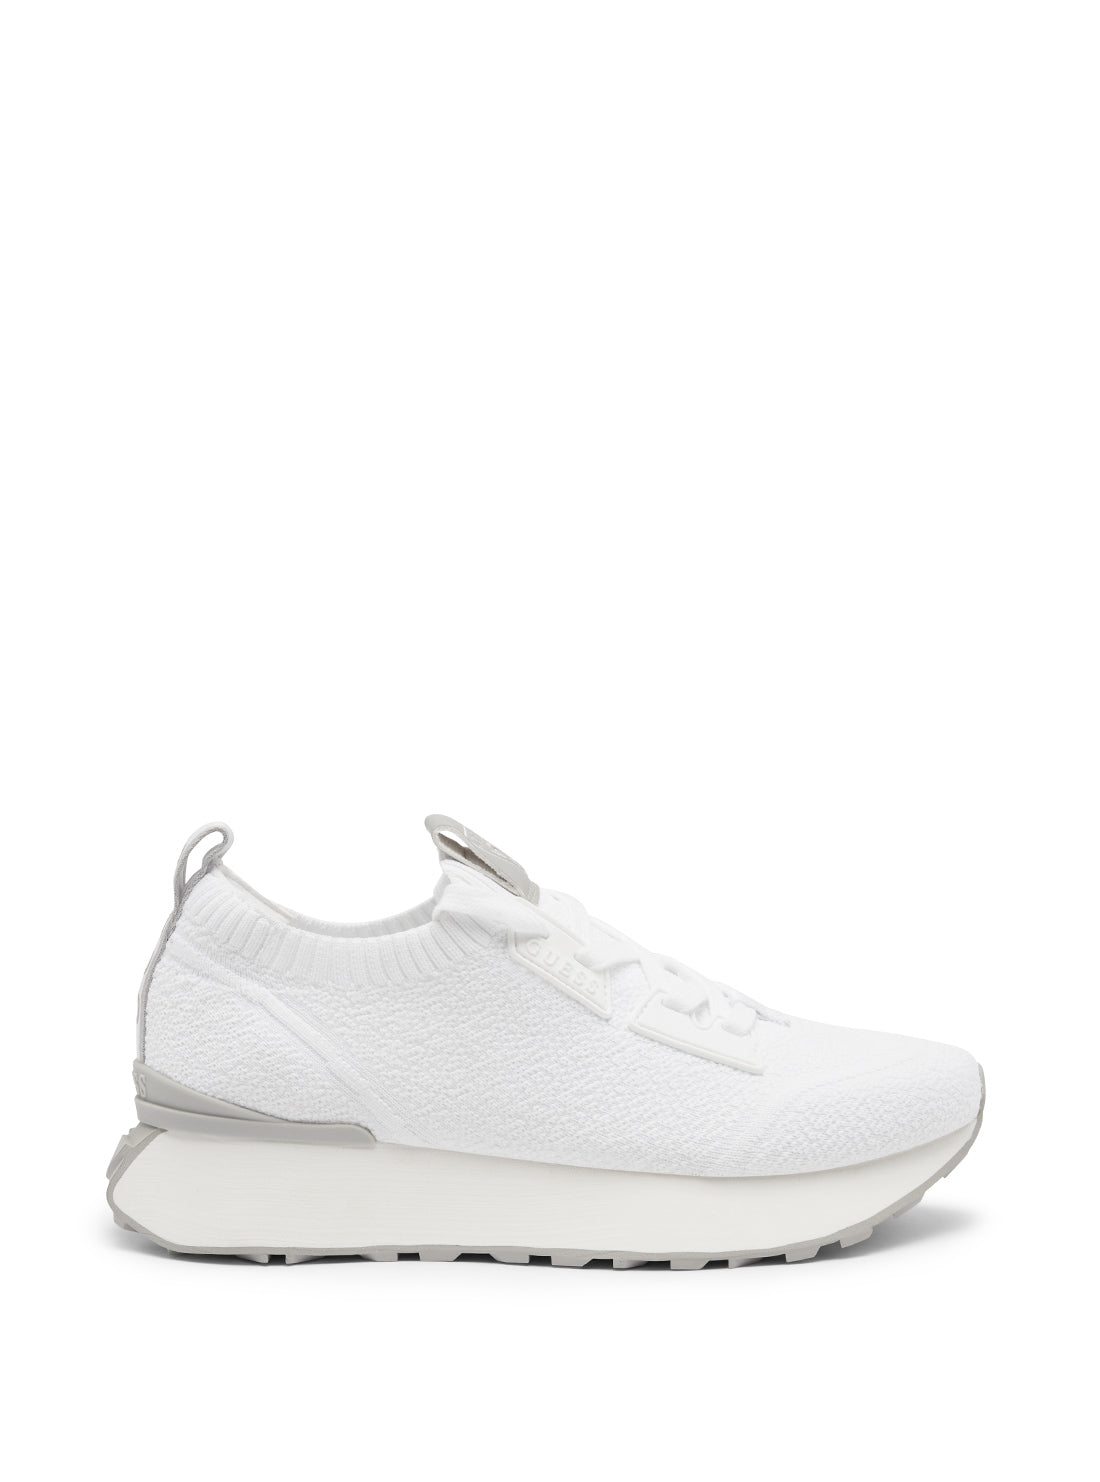 GUESS White Grey Laurine Low-Top Sneakers side view